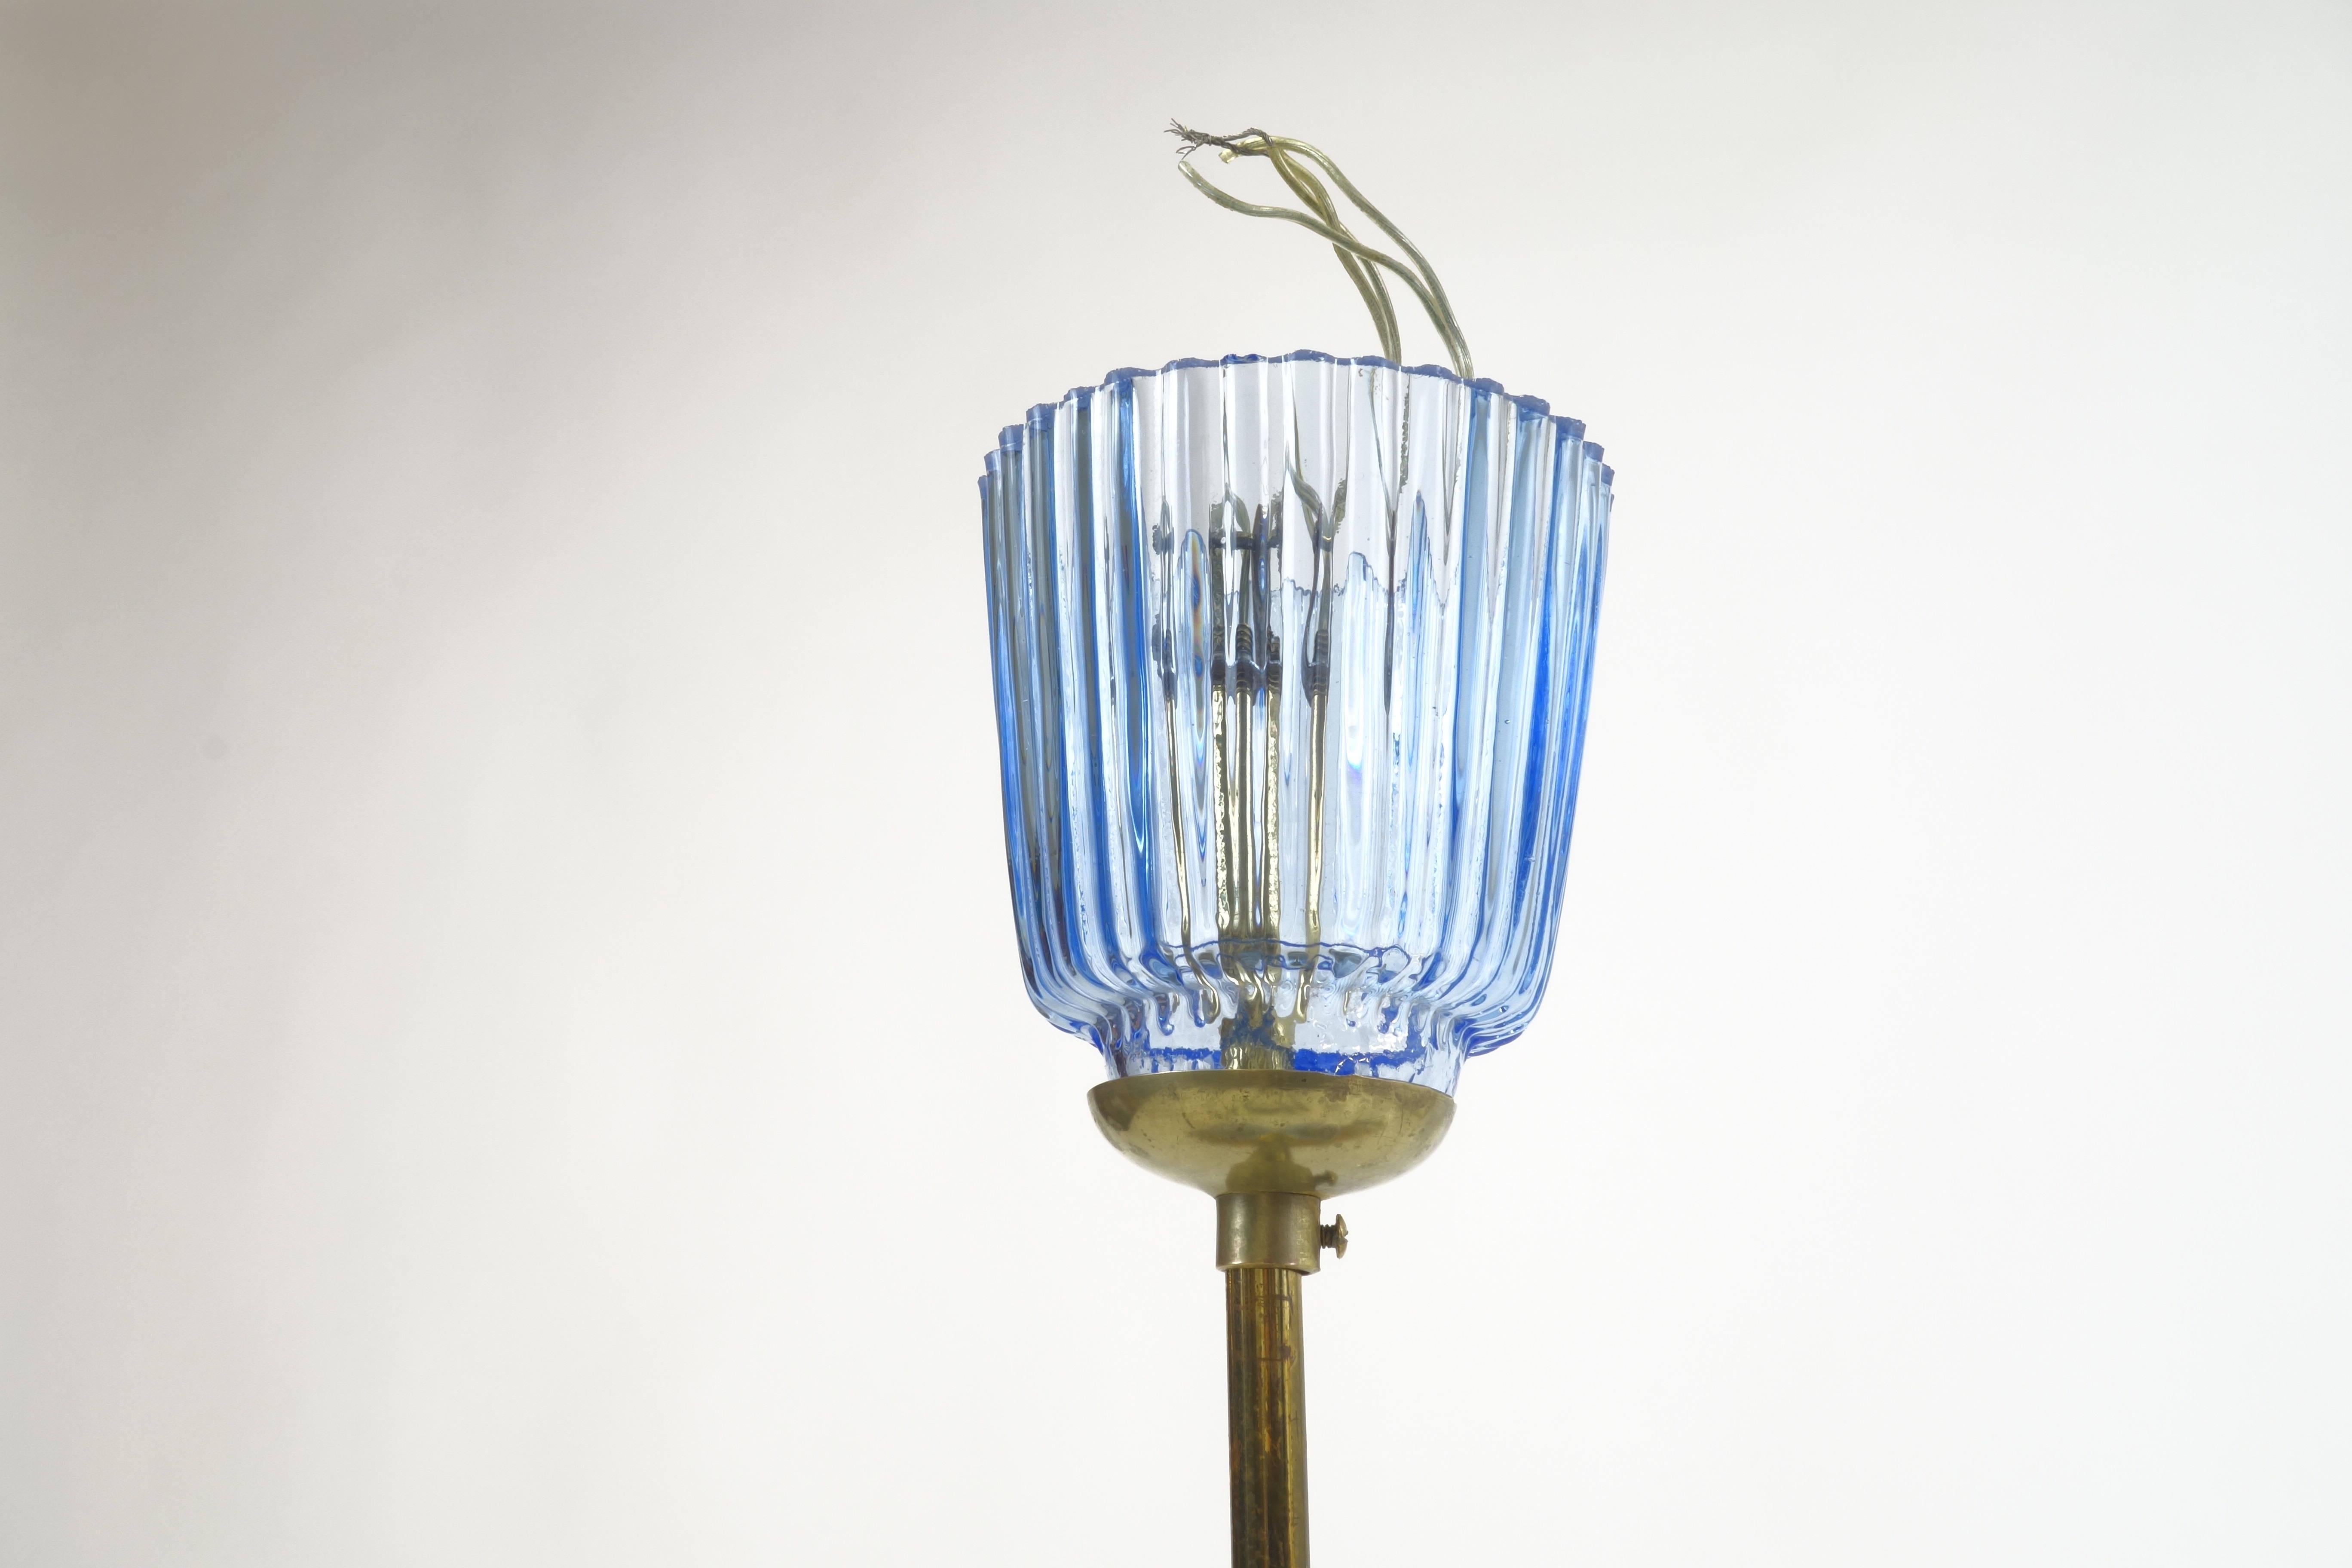 Chandelier by Barovier & Toso, Murano glass blue 1940s brass finishing 1